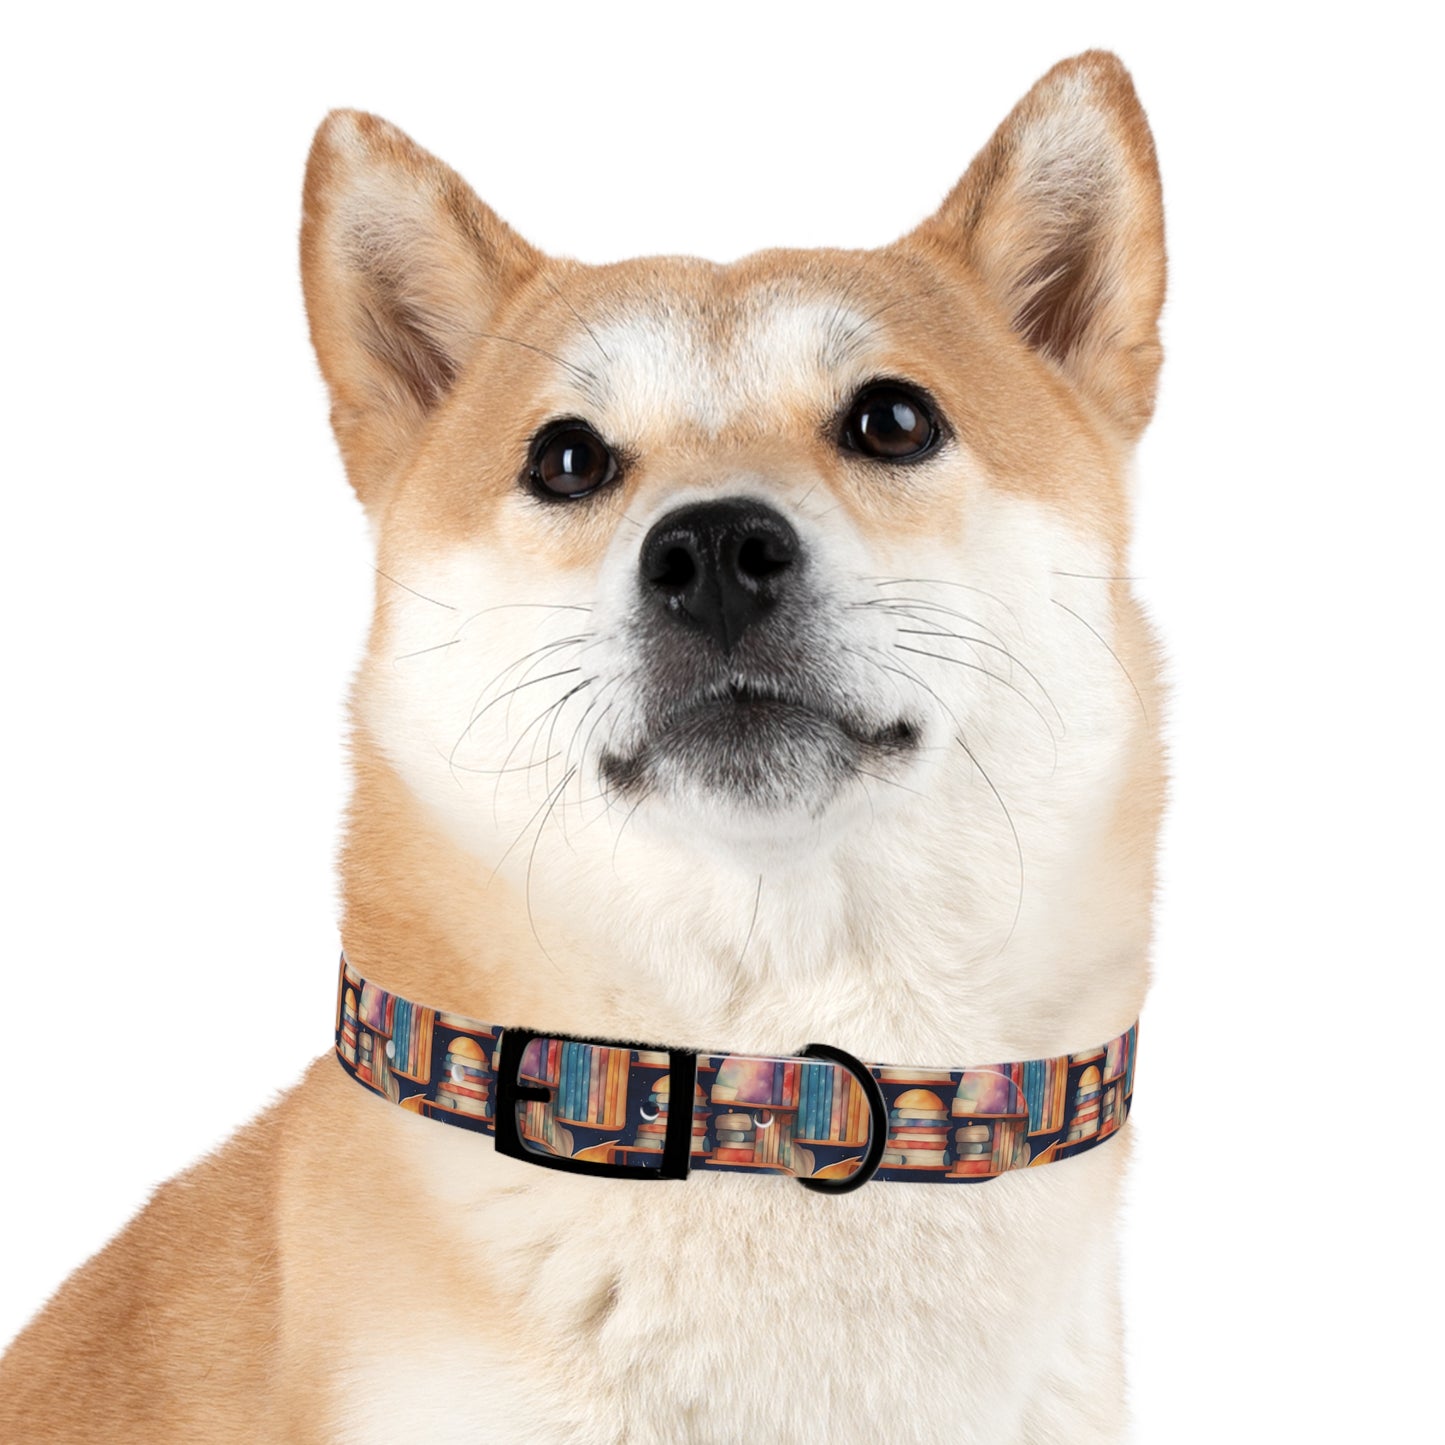 Library Book Watercolor Pattern Dog Collar